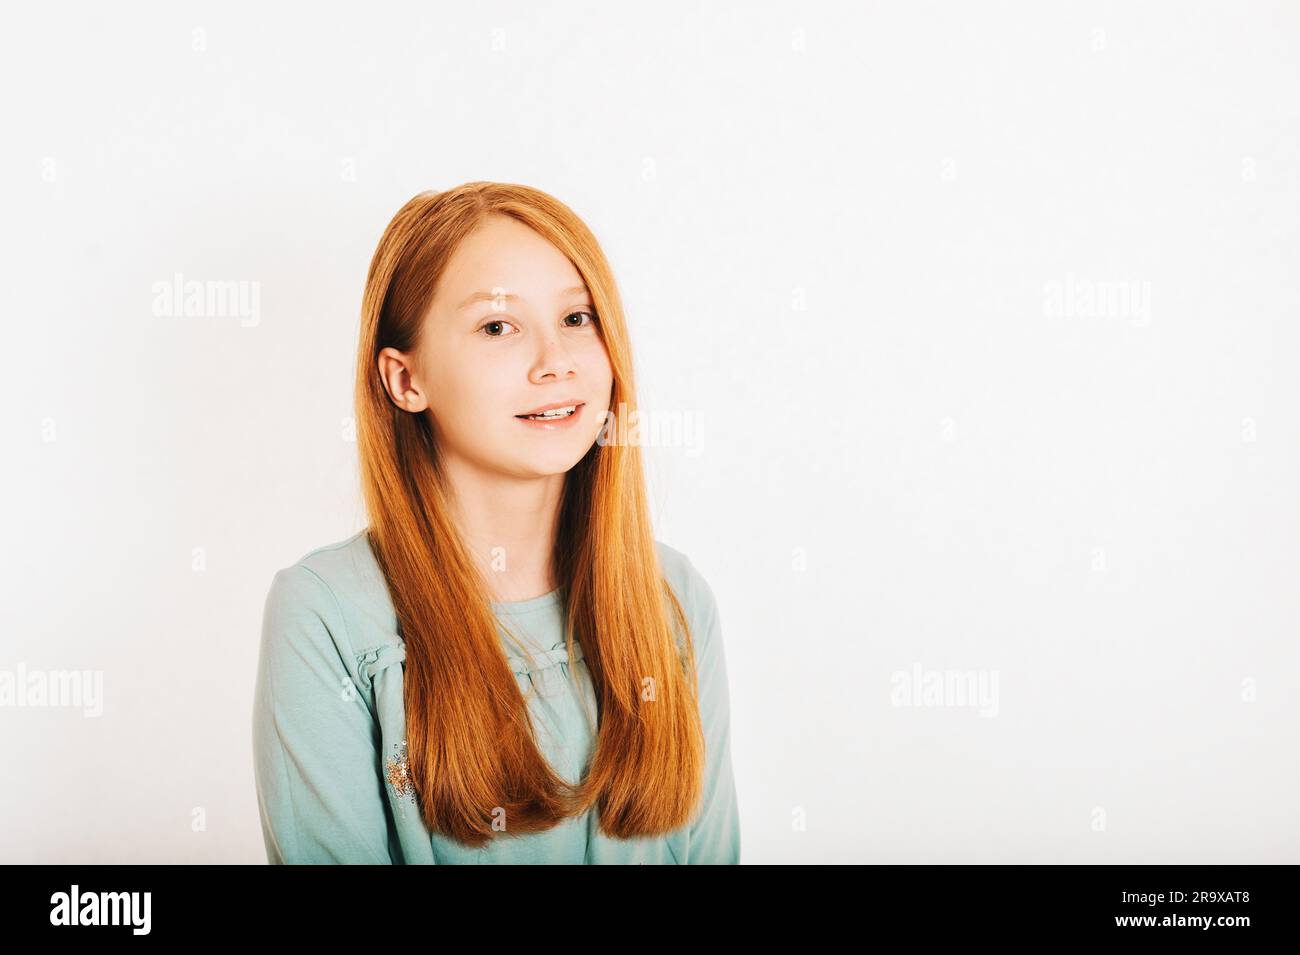 Studio shot of young preteen red-haired girl against white background Stock Photo